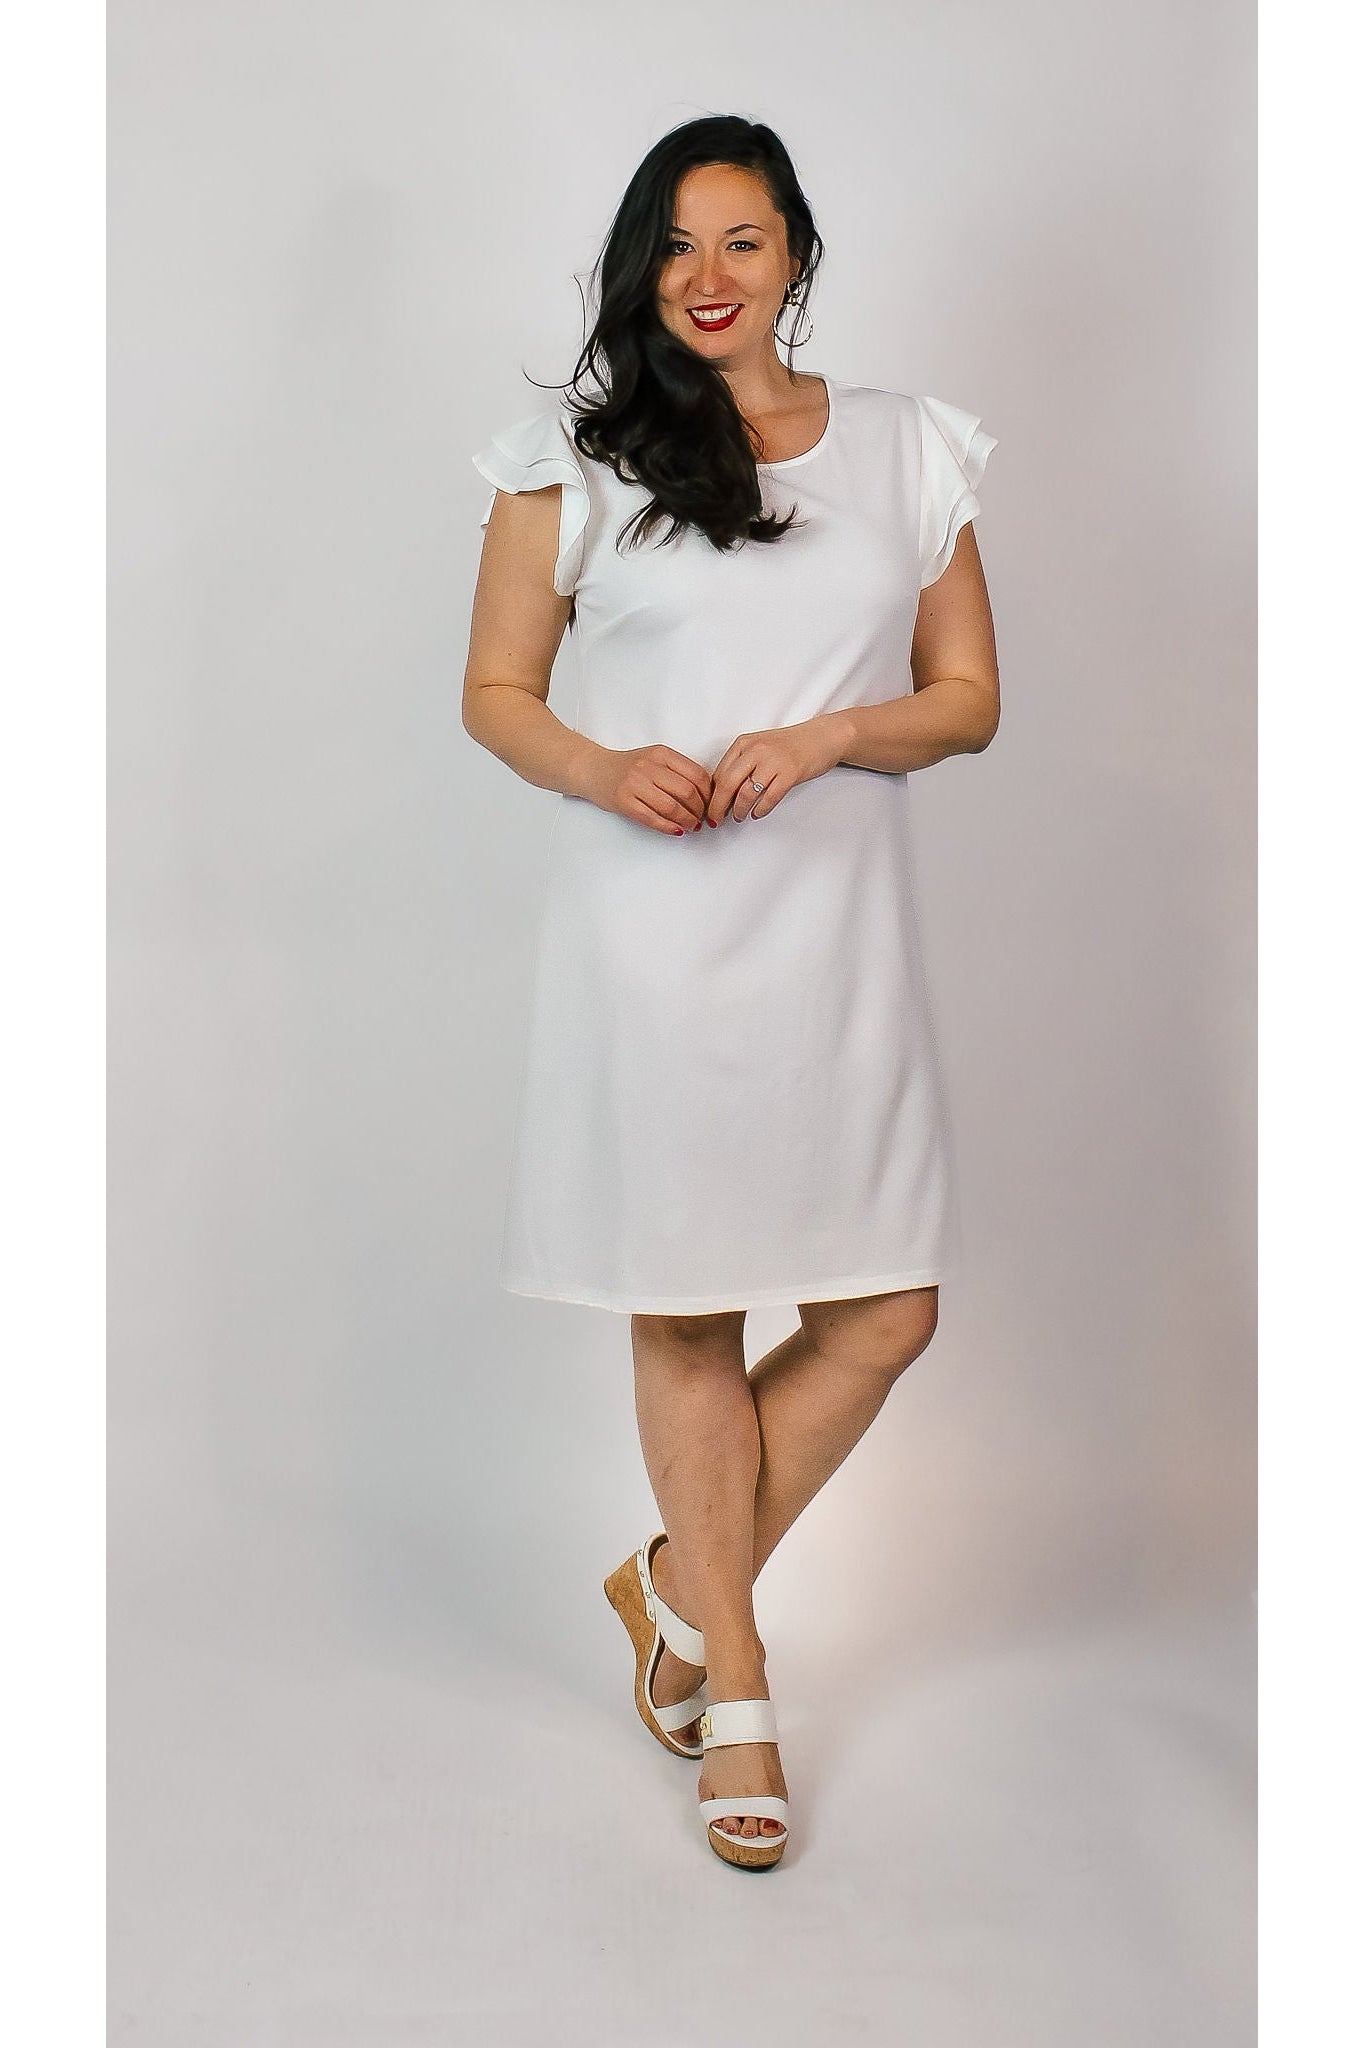 Nalia Tiered Cap Sleeve Dress Dresses-Casual Aryeh Small White 